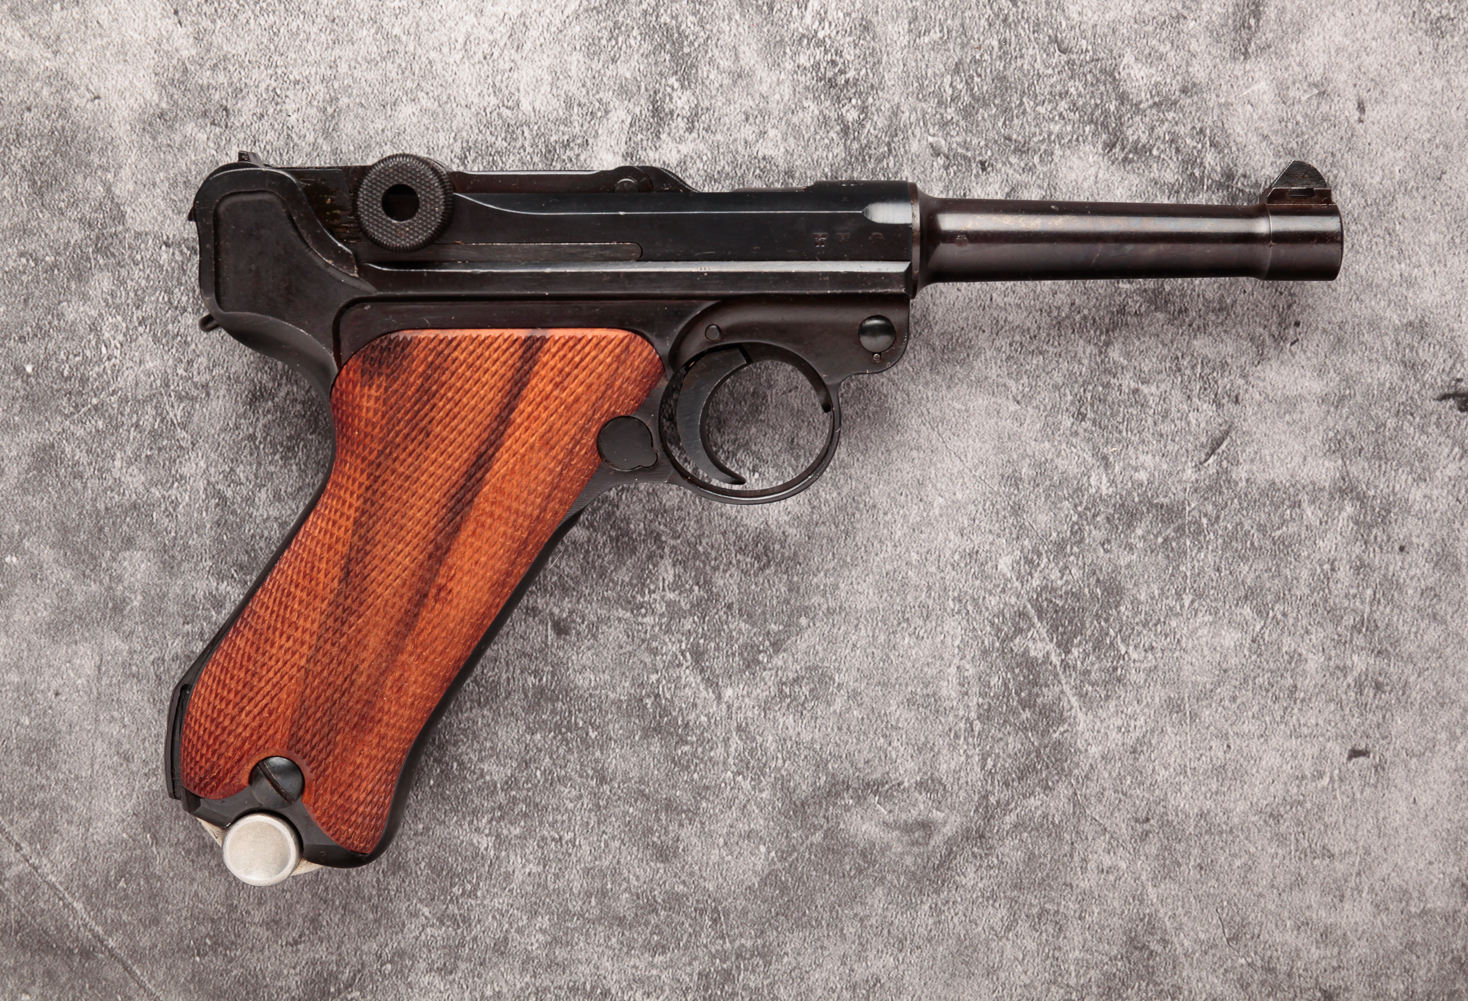 1938 LUGER S/42 9MM SEMI AUTOMATIC